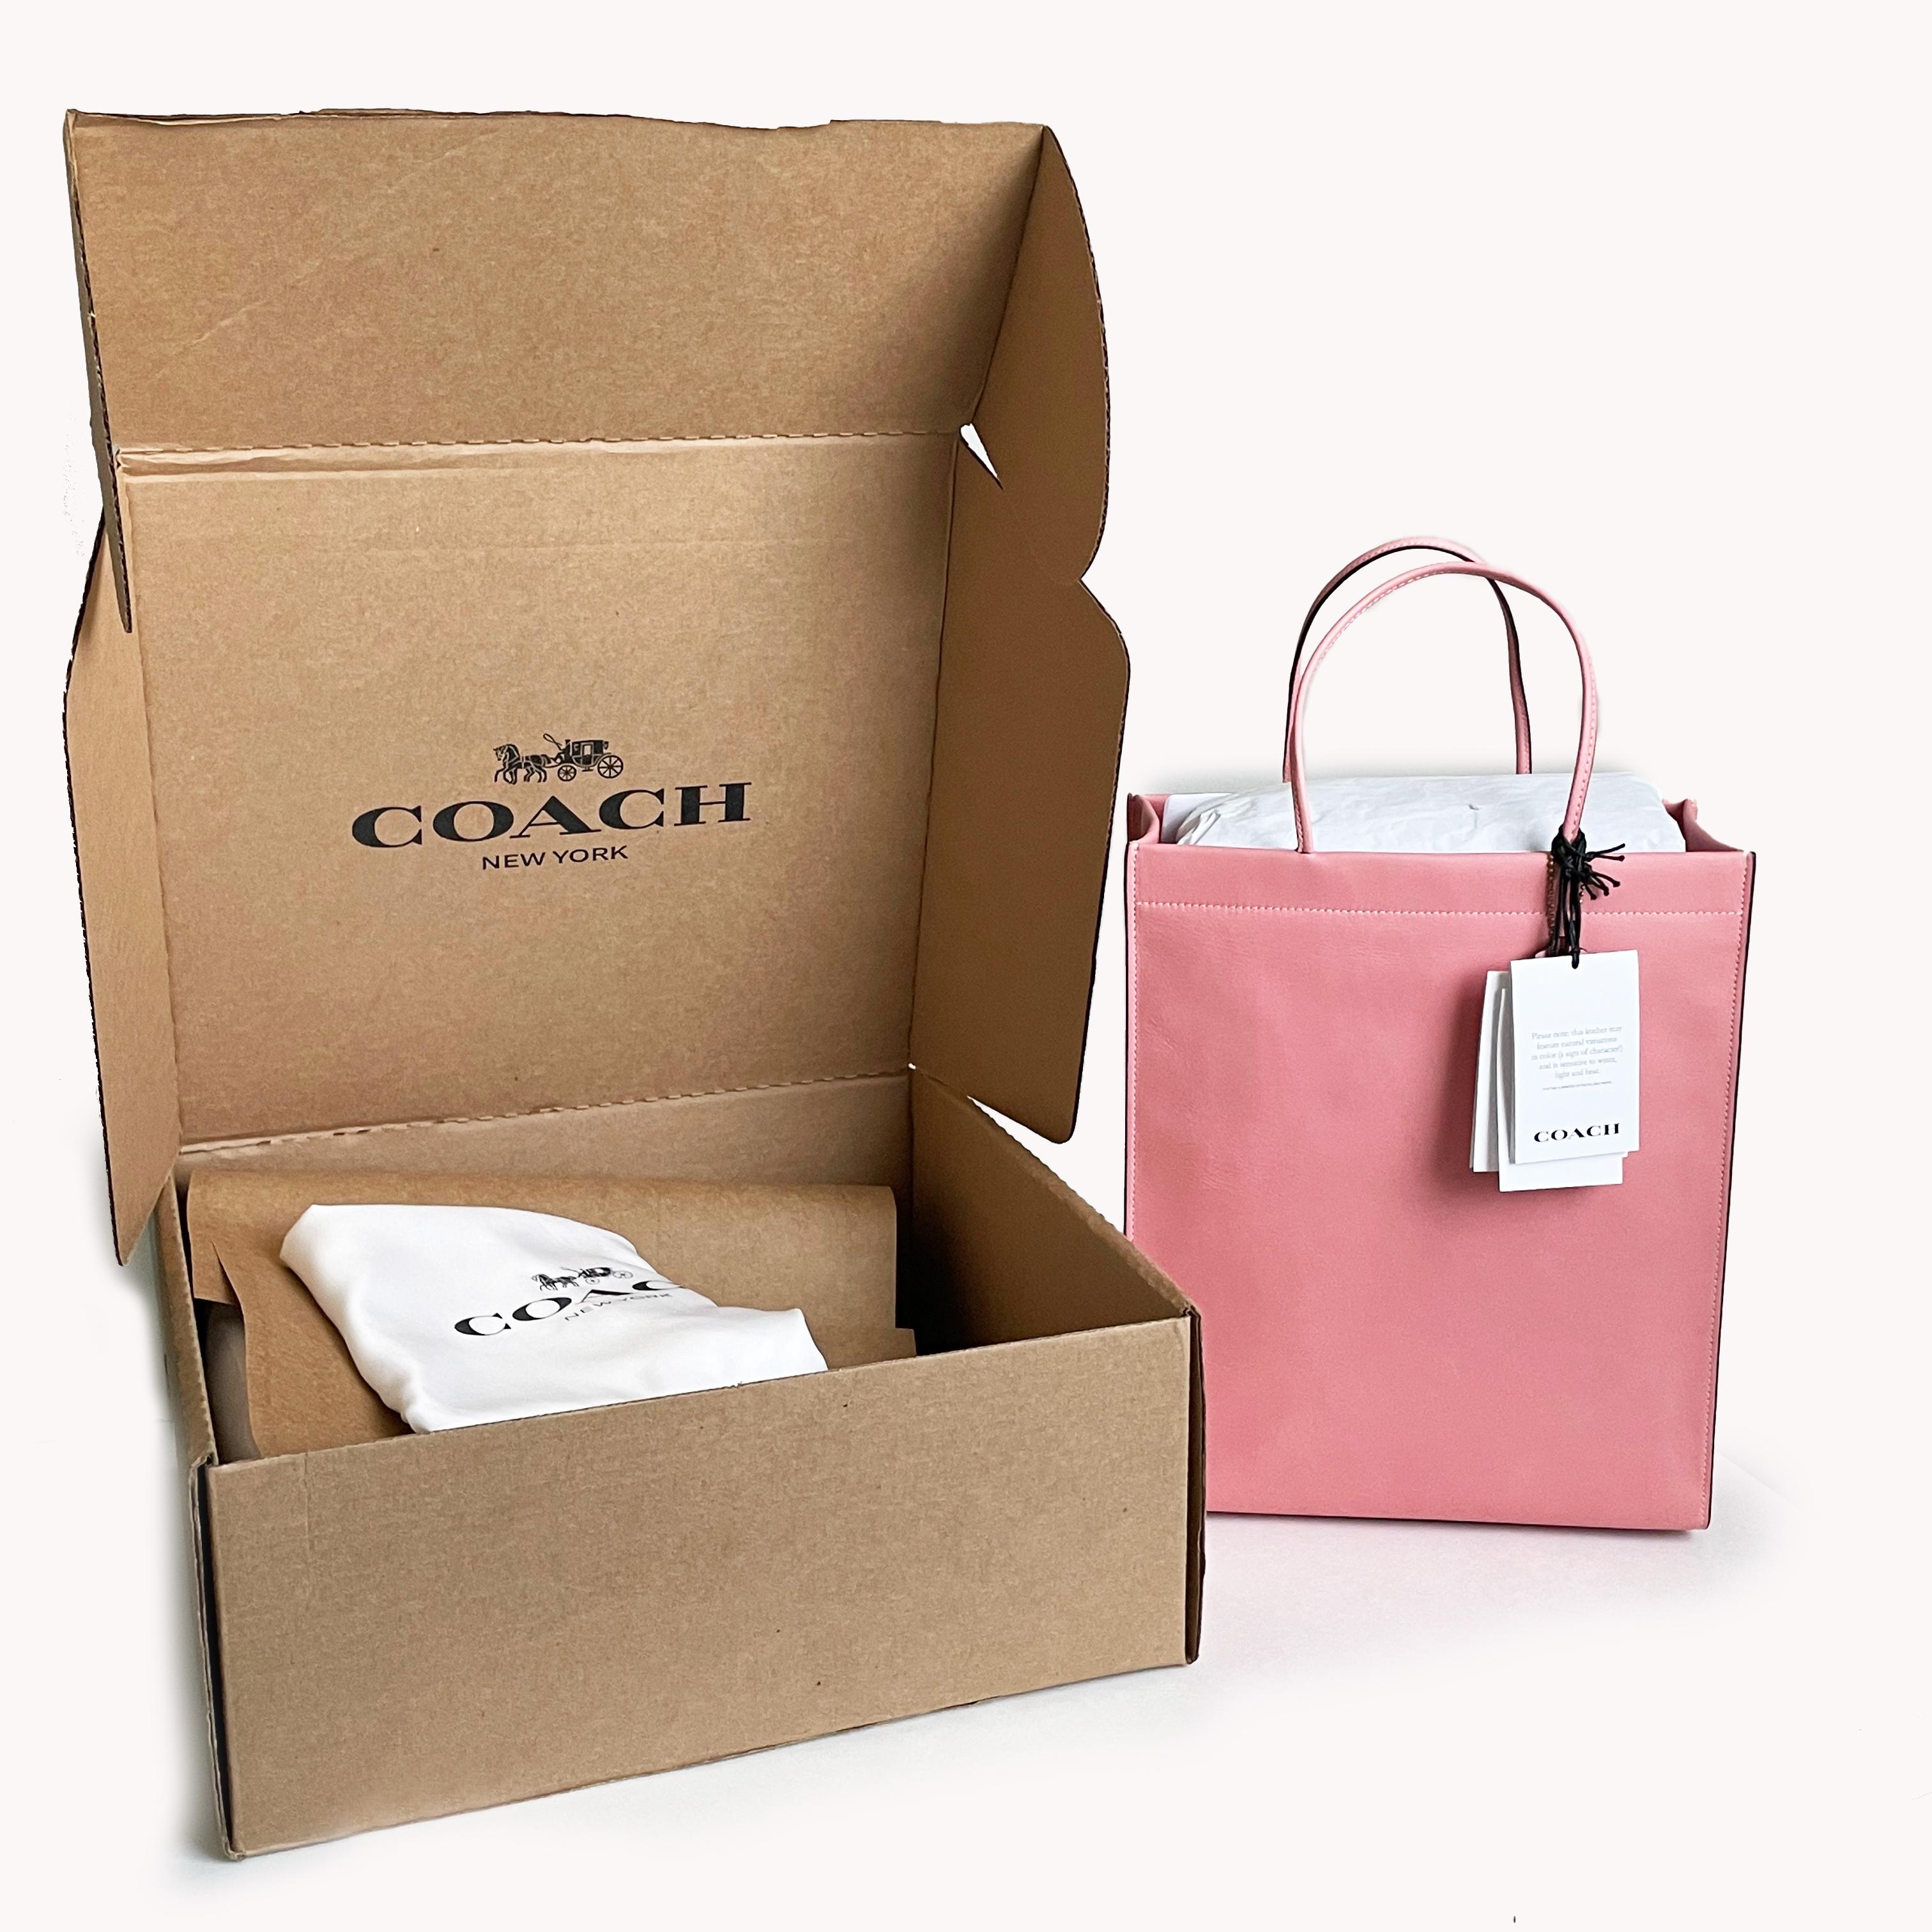 Authentic, new with tags Coach Cashin Carry Tote from the 2021 Coach Forever Collection, style C4660. Coach calls this color 